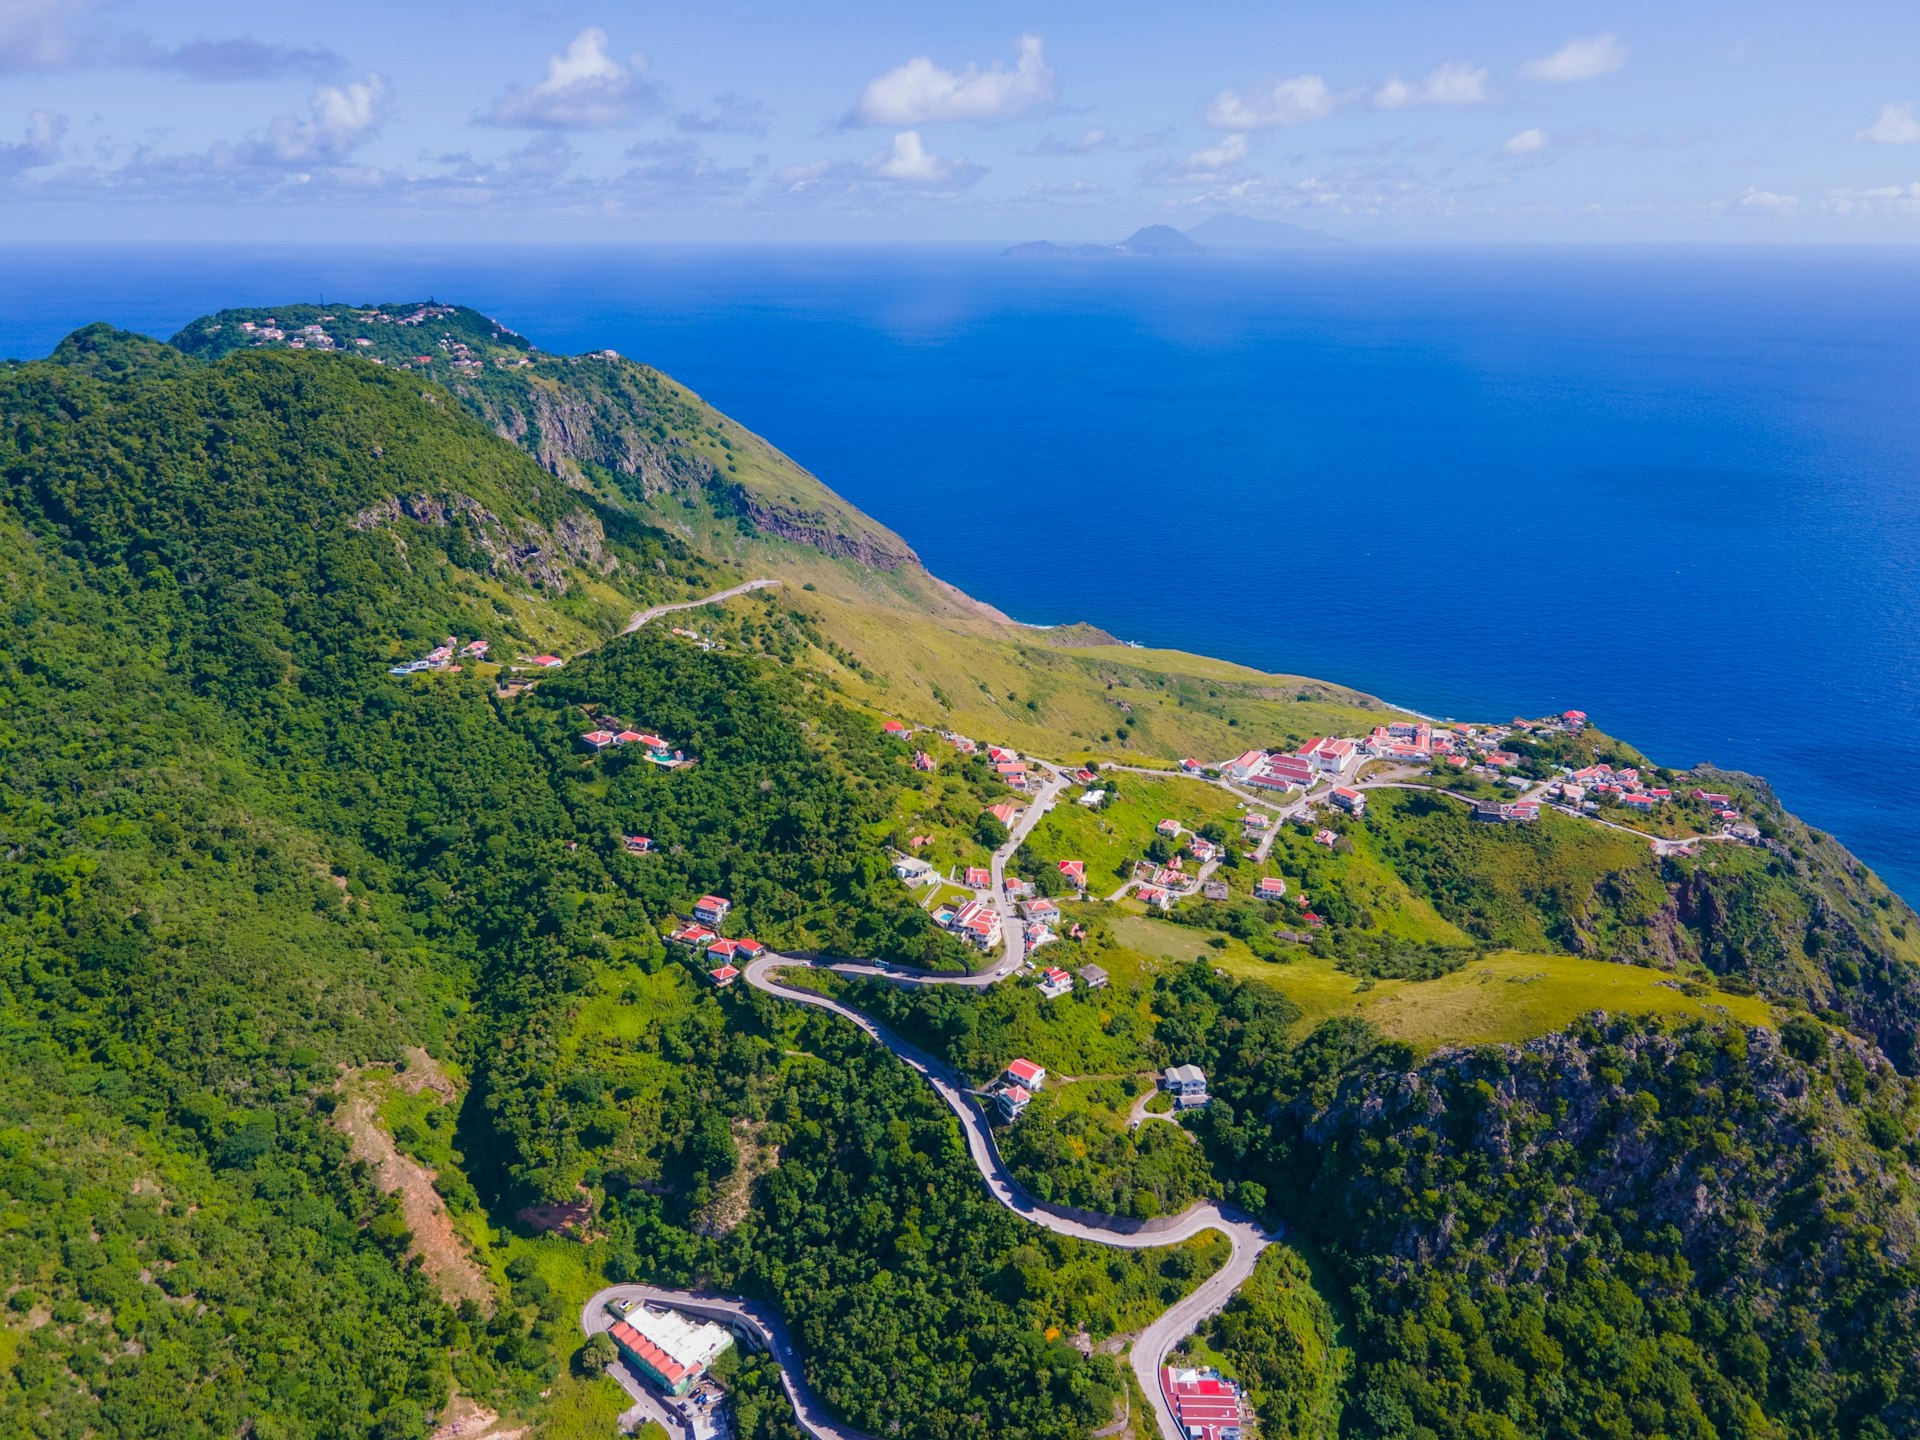 Road to Fort Bay Harbor from The Bottom, Saba, Caribbean Netherlands